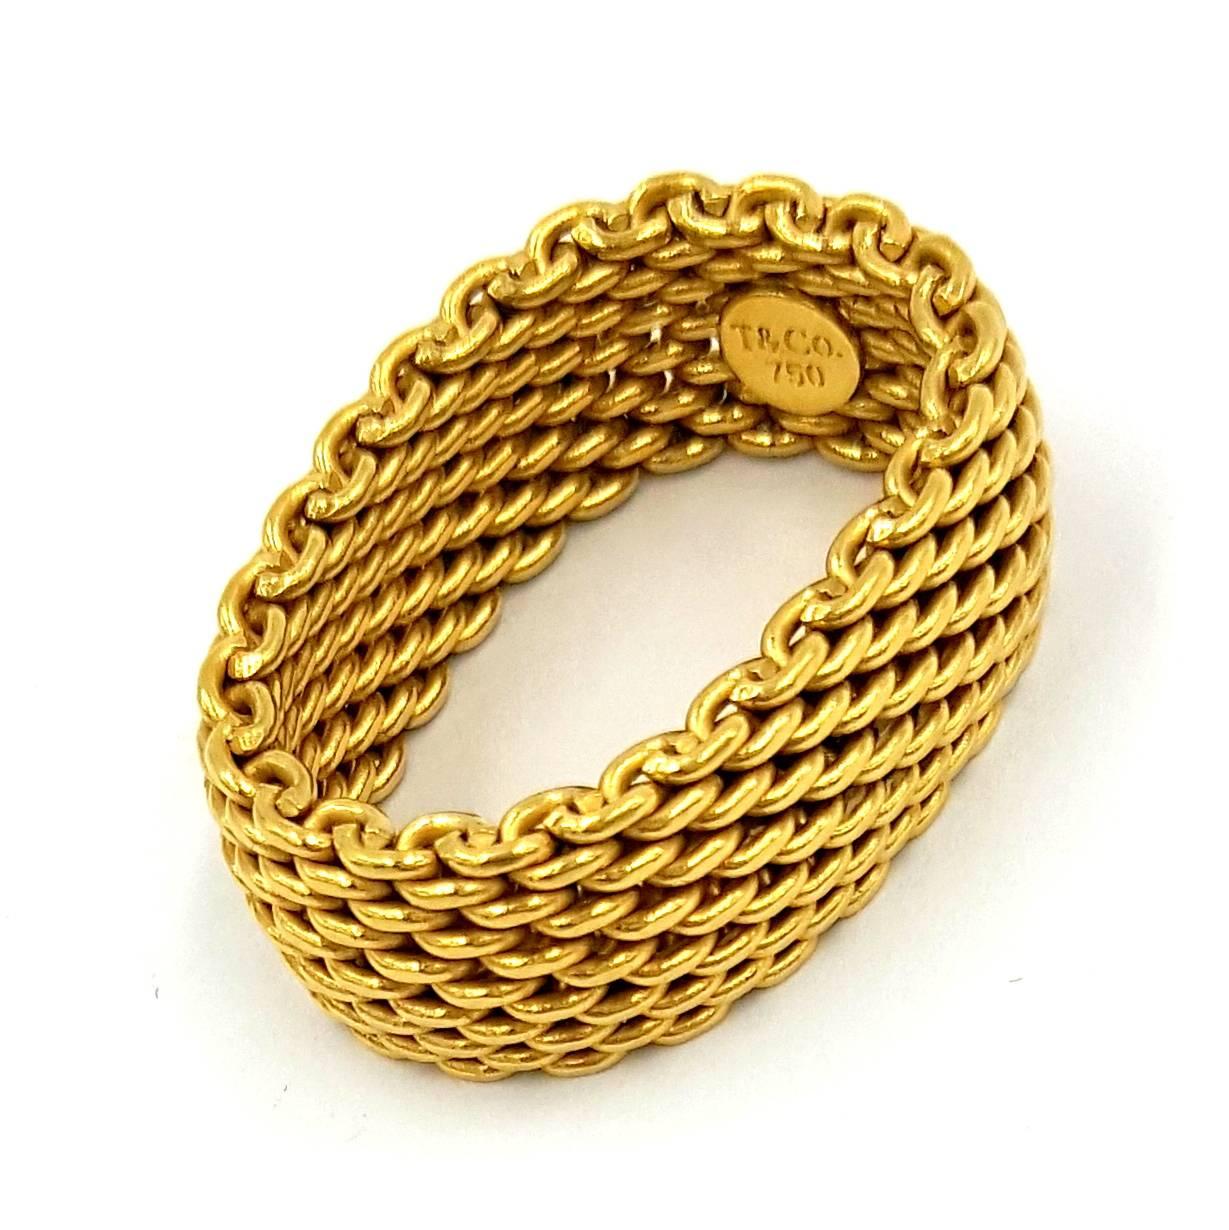 18K Yellow Gold Tiffany & Co. Somerset Exclusive Collection ring complete with signature stacked mesh links. Casual, refined, modern, elegant and most of all comfortable this ring is one of Tiffany's most popular pieces. This style was sold in two